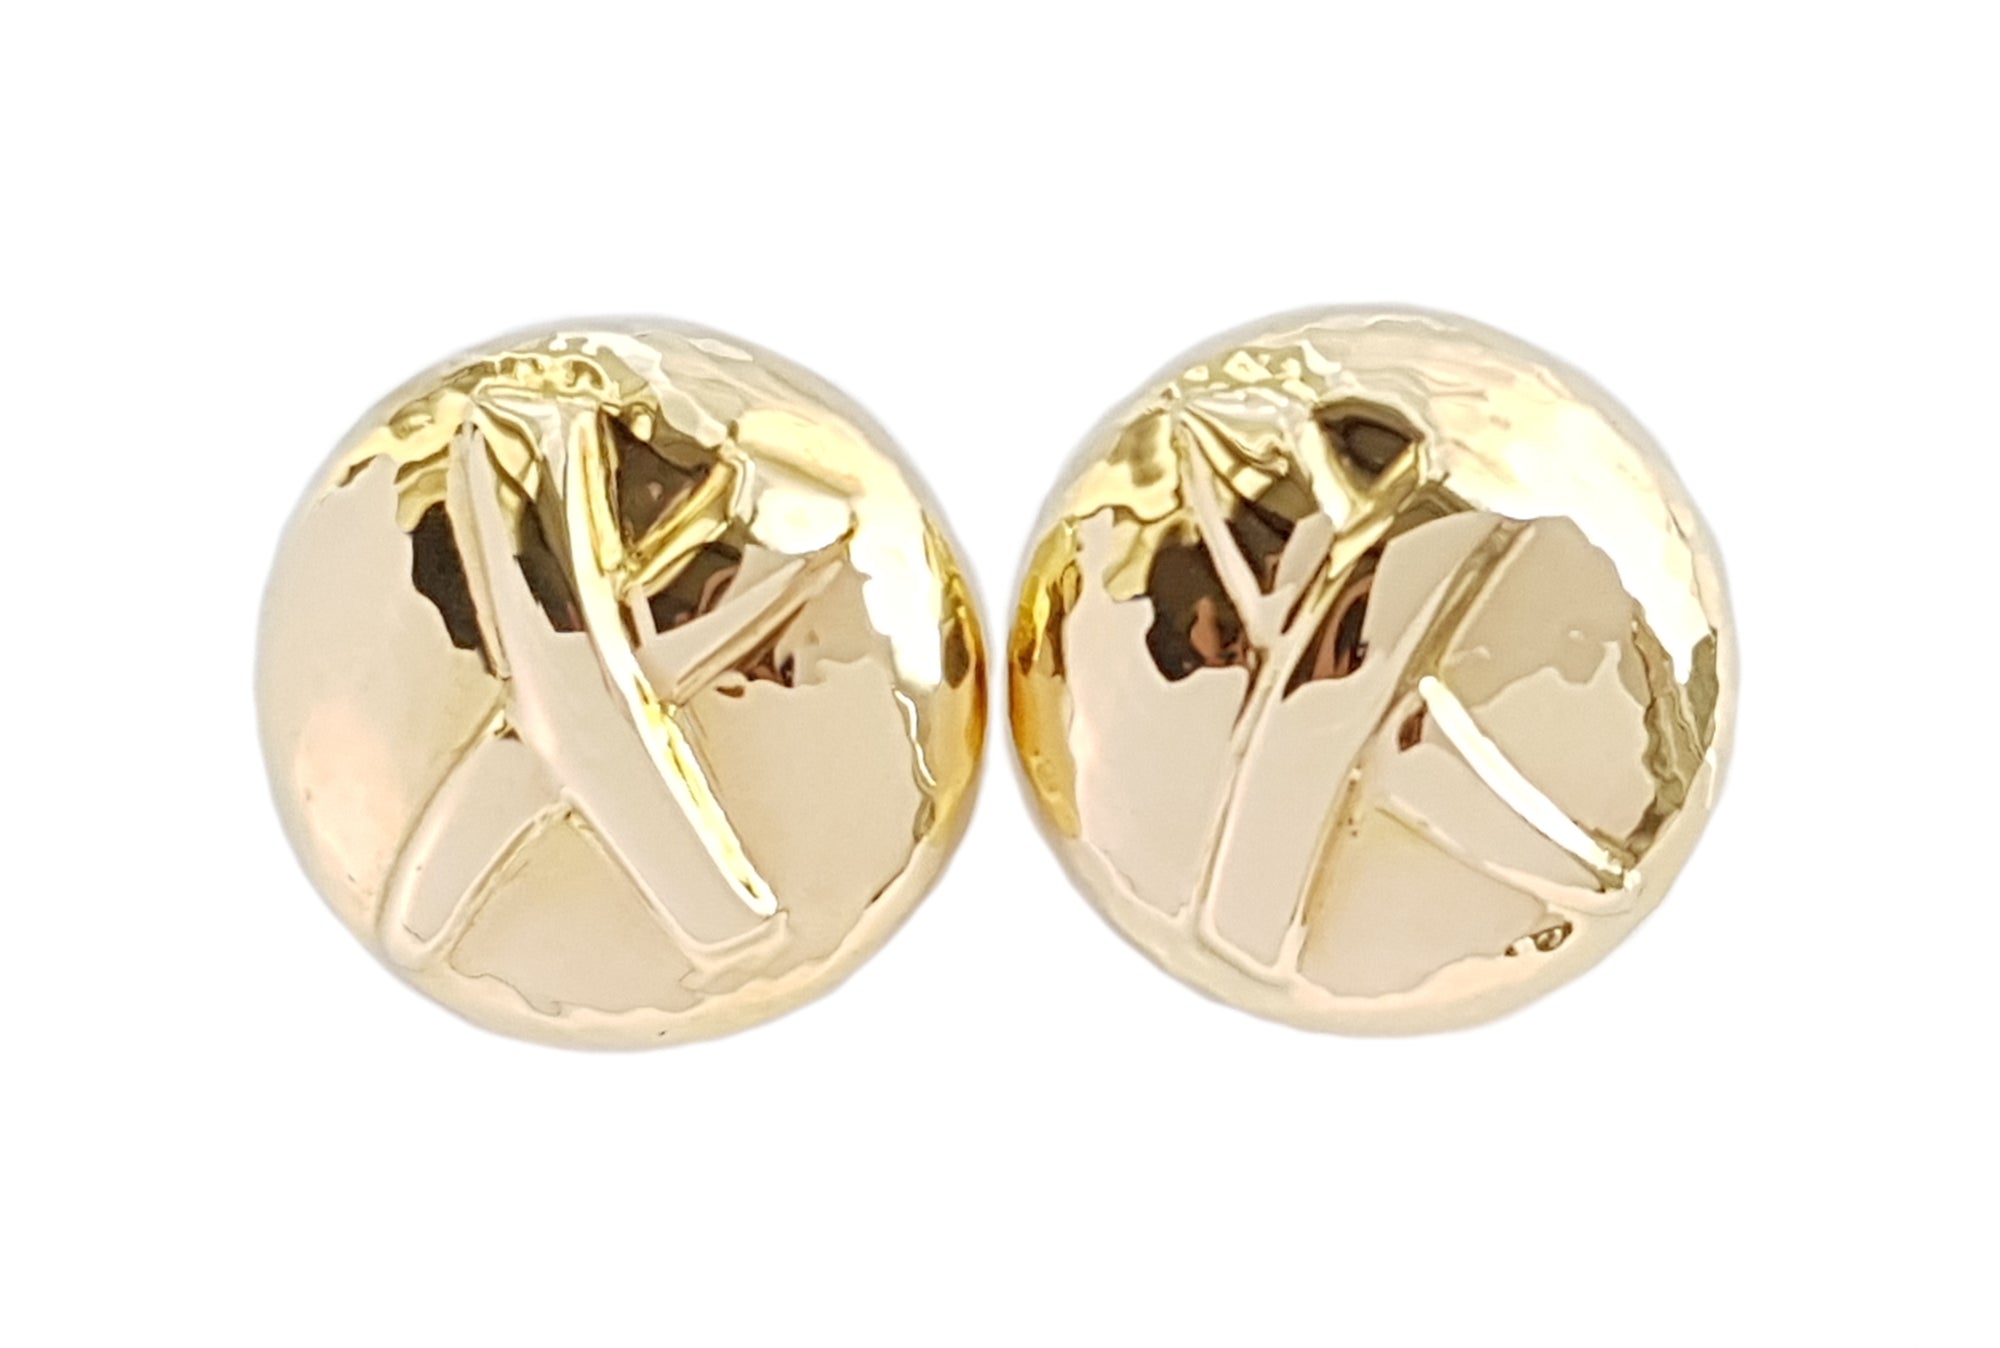 Vintage 1990 Tiffany & Co Paloma Picasso Kiss Disc Earrings 18k Gold